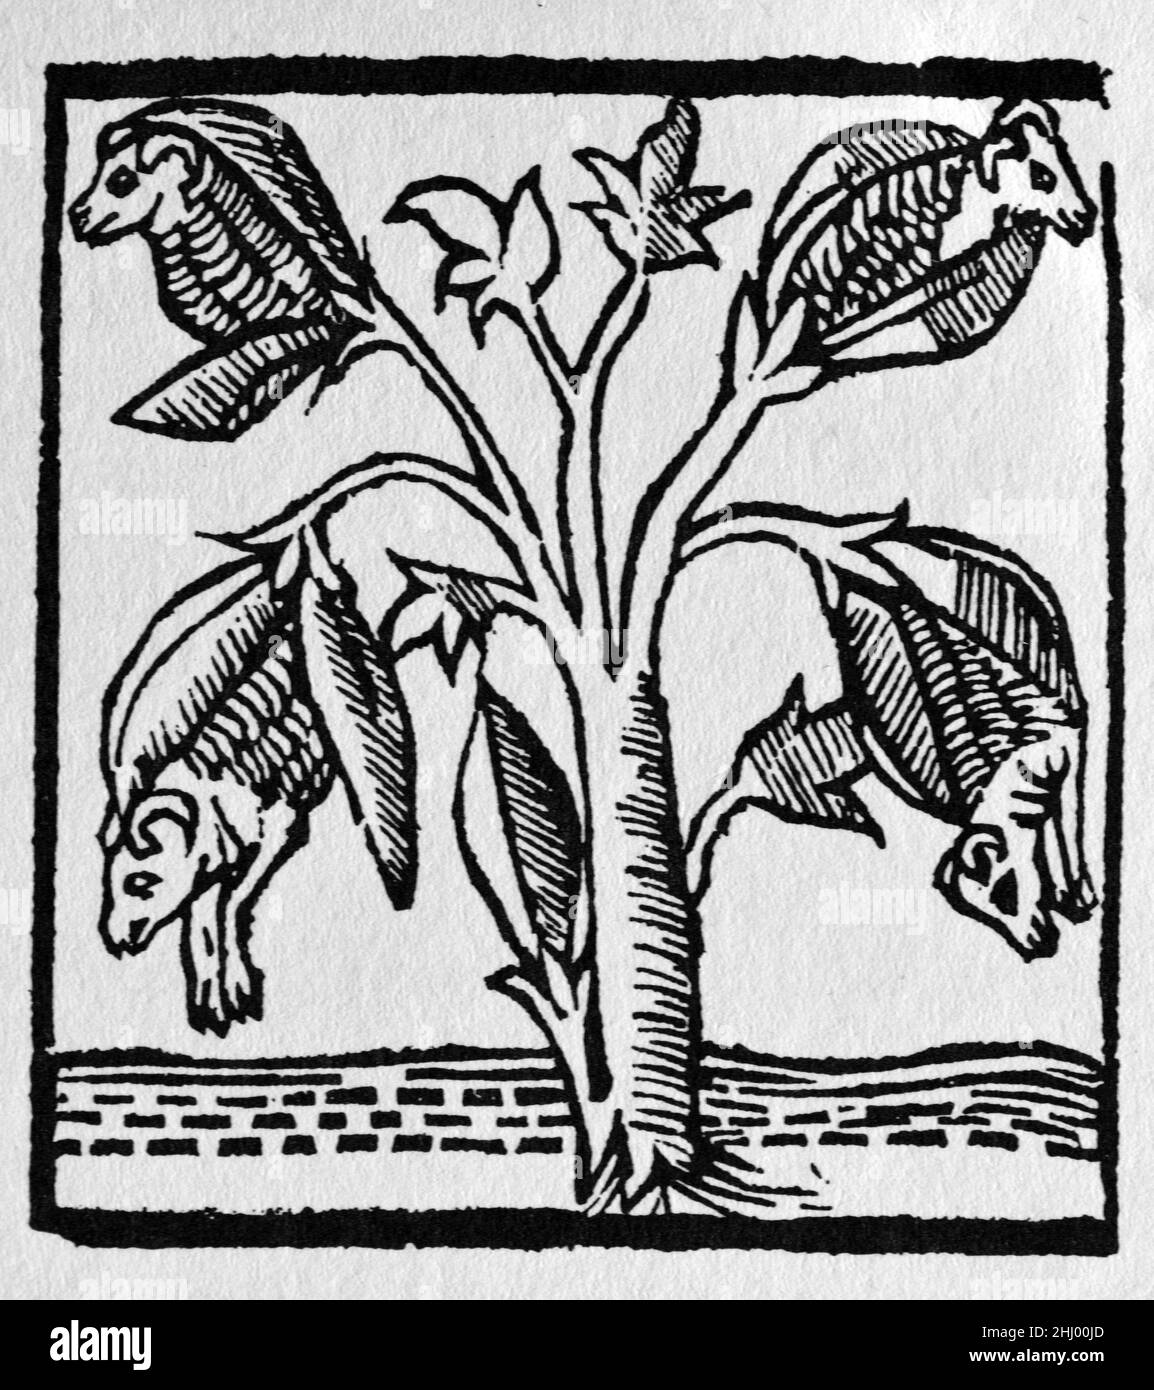 Fantastical Image of a Cotton Plant as Perceived by Sir John Mandeville in The Travels of John Mandeville. According to Mandeville when the fruits mature the y opened to reveal lambs. When the branches bent down the lambs could feed on the grass beneath. c16th Vintage Woodcut Print, Engraving or Illustration from a Spanish edition of 1521. Stock Photo